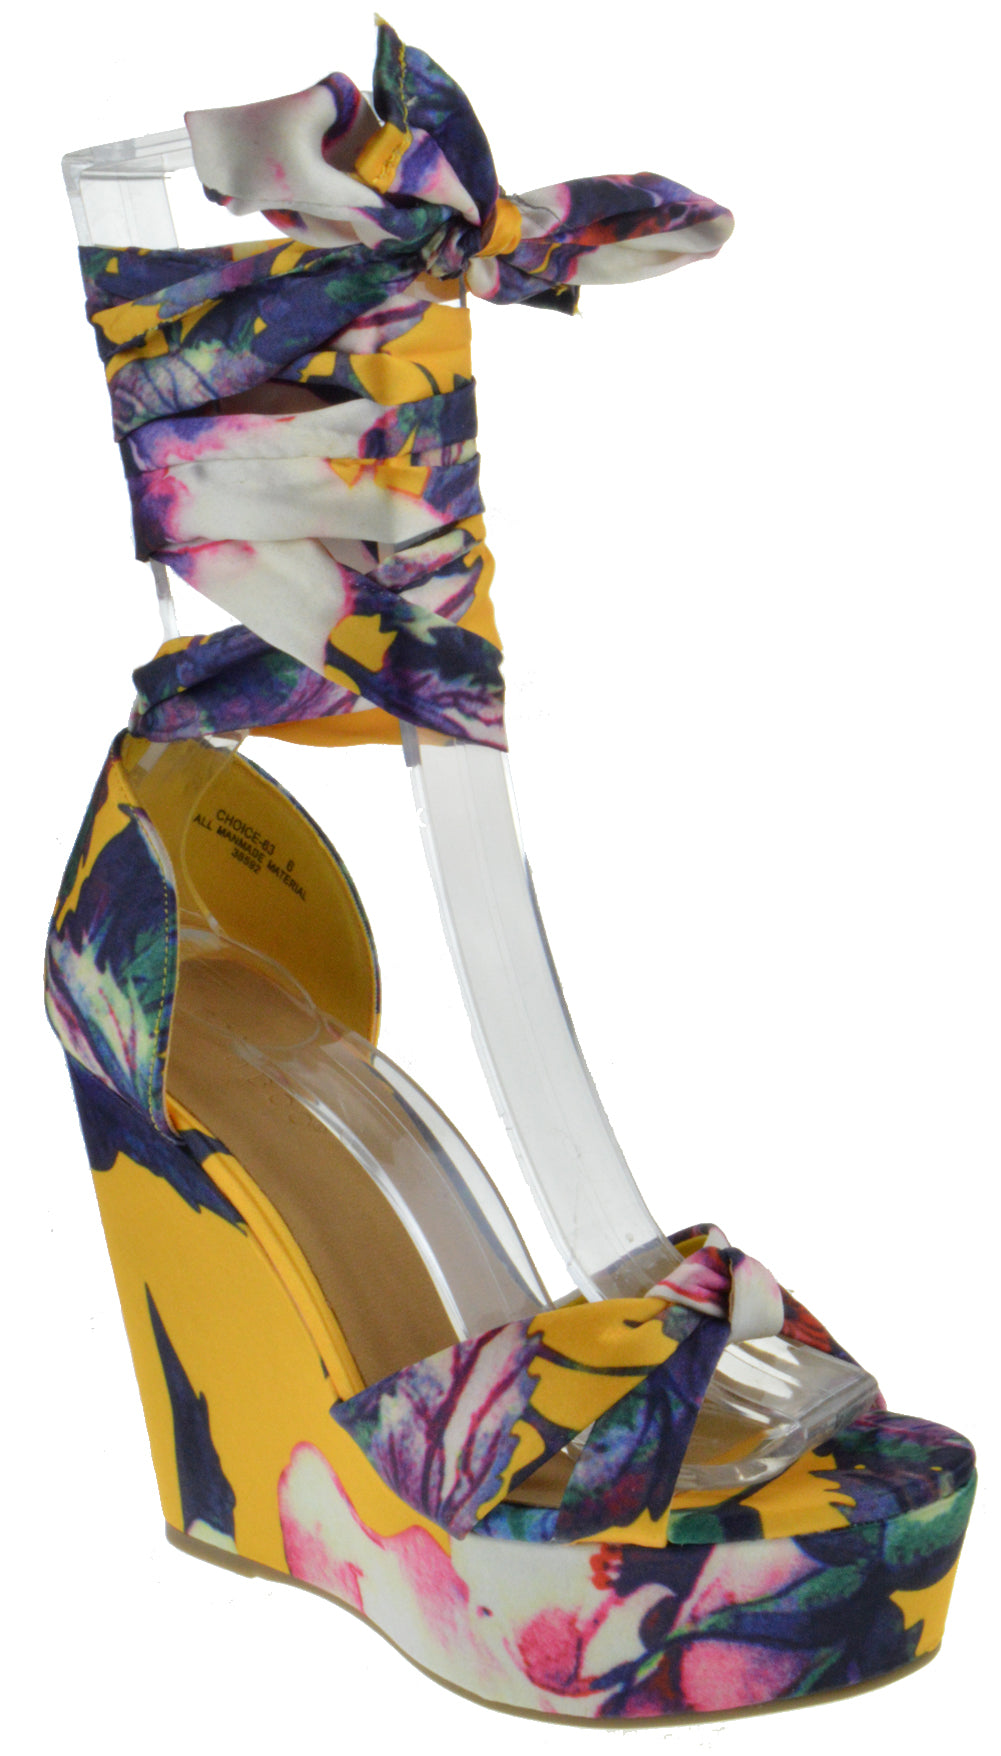 Daily steal: Floral print wedge heels, $58 - FASHION Magazine